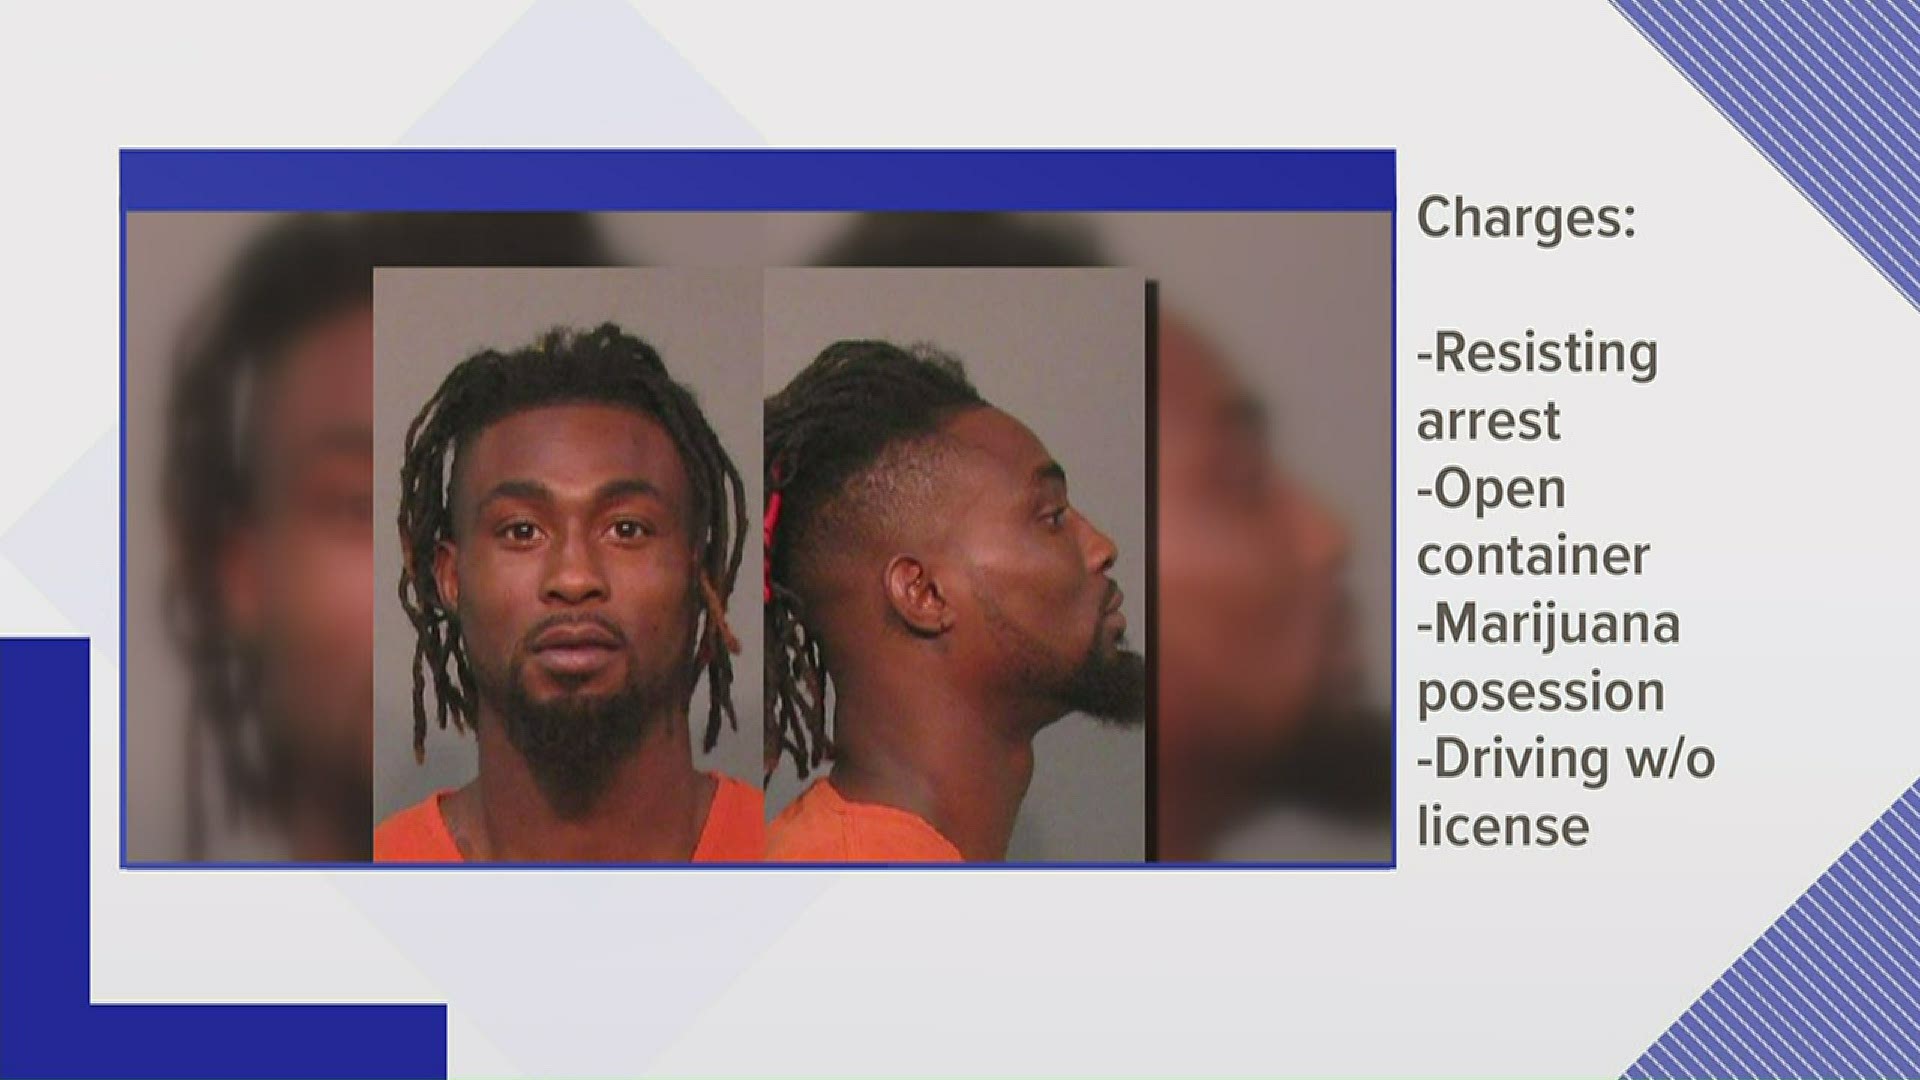 The former Clemson player is behind bars in York County after being arrested Tuesday.